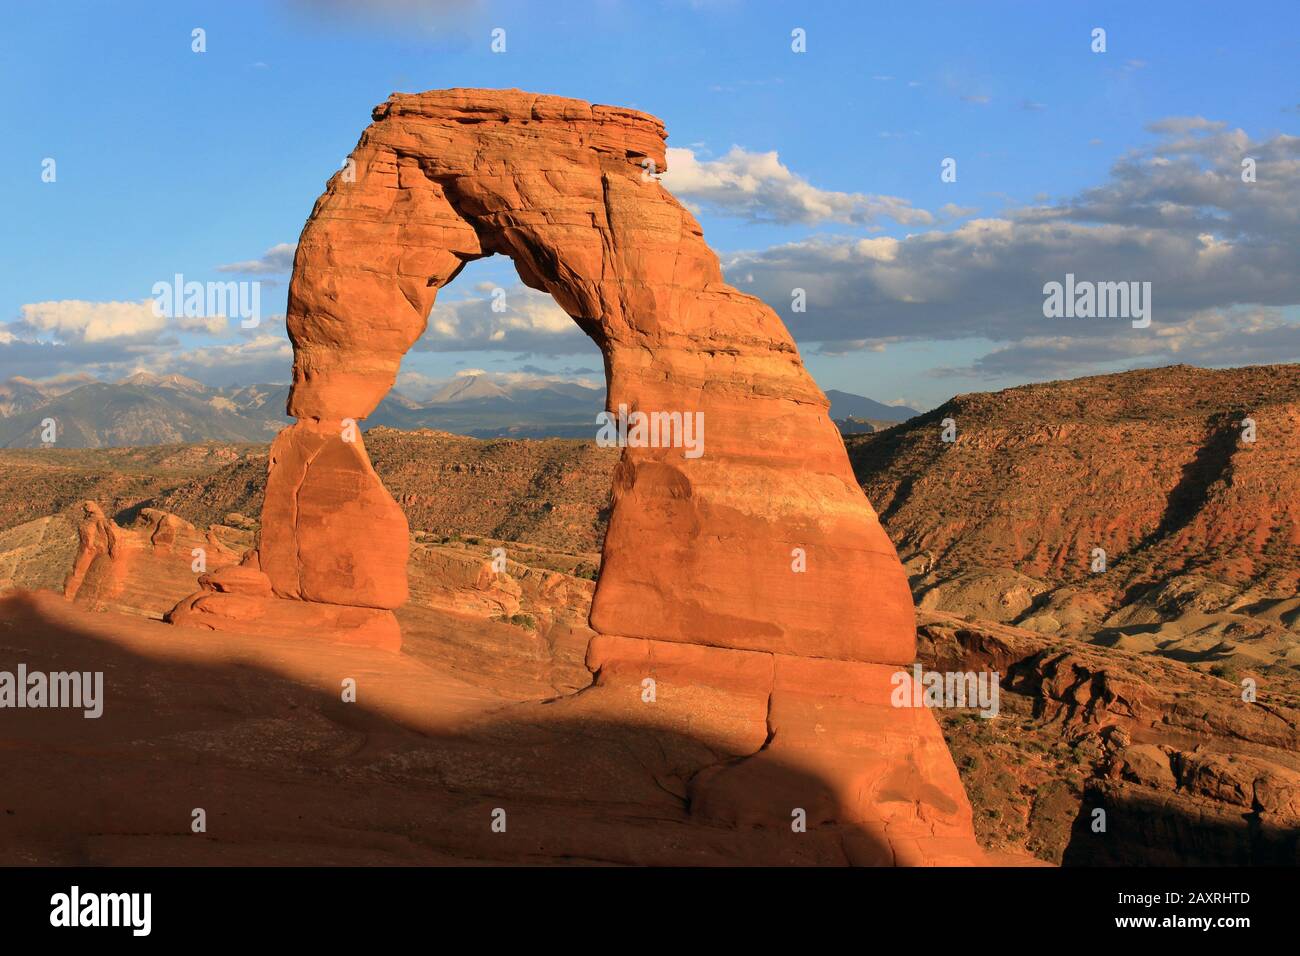 Delicate Arch Viewpoint, Arches National Park, Utah, USA Stock Photo